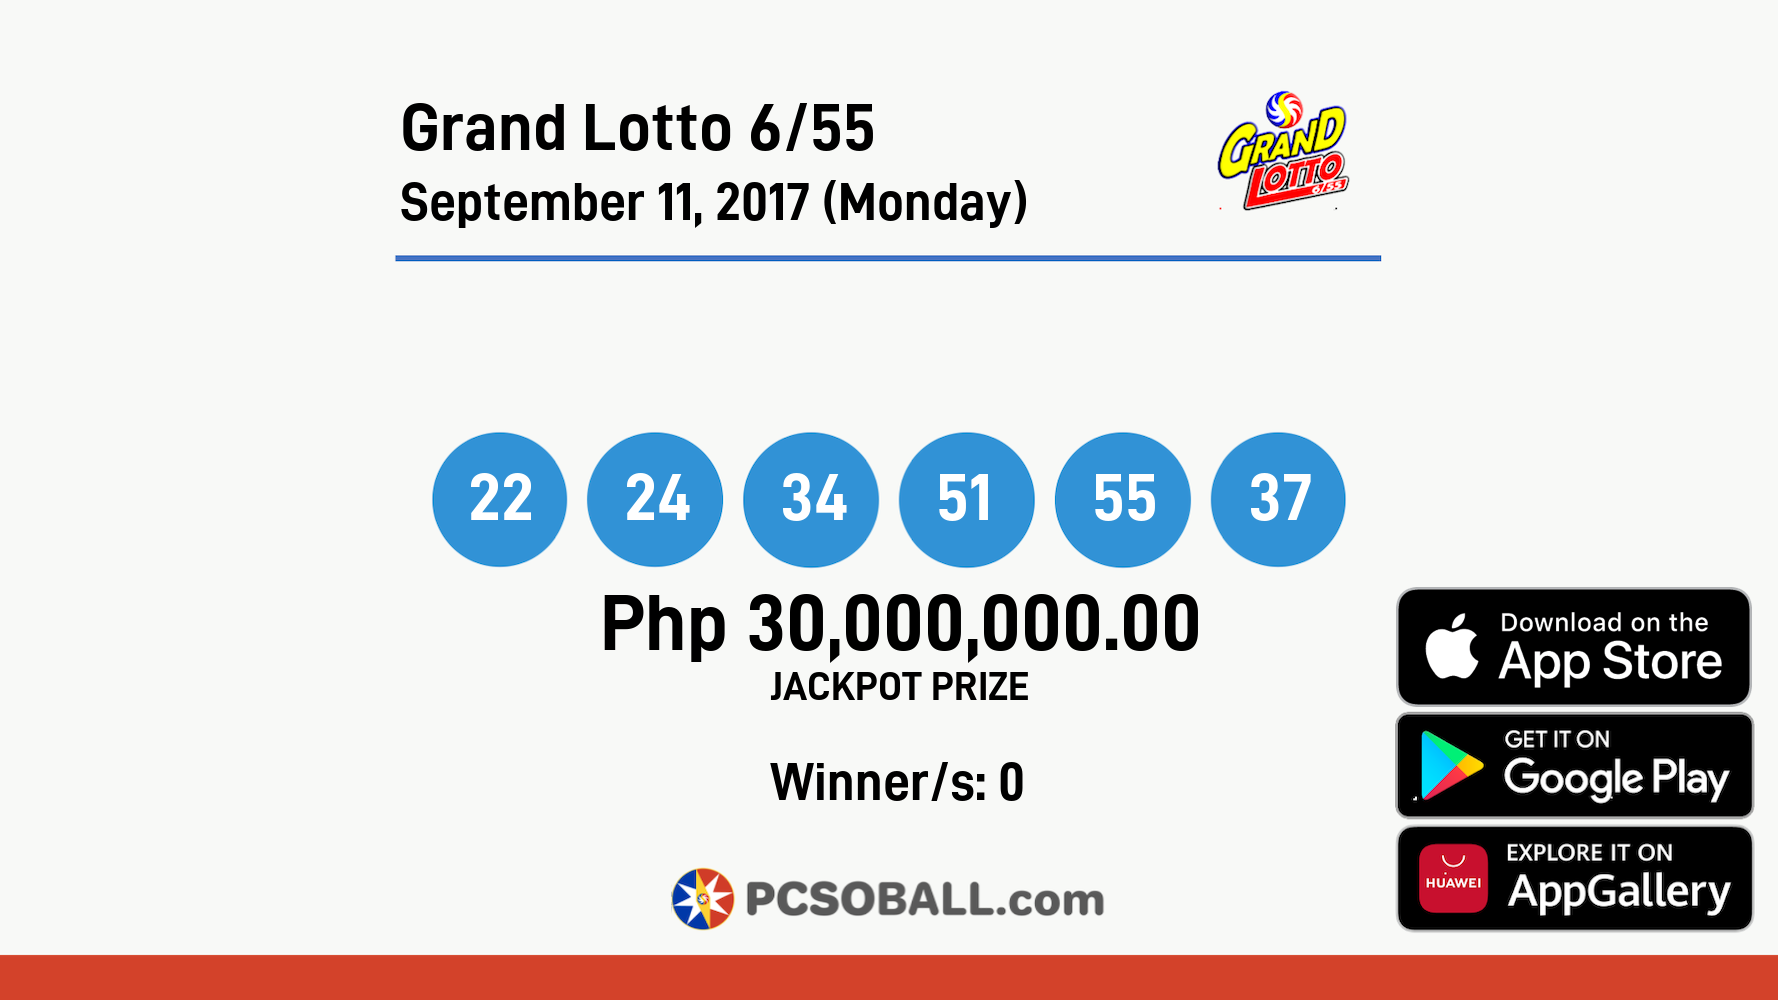 Grand Lotto 6/55 September 11, 2017 (Monday) Result